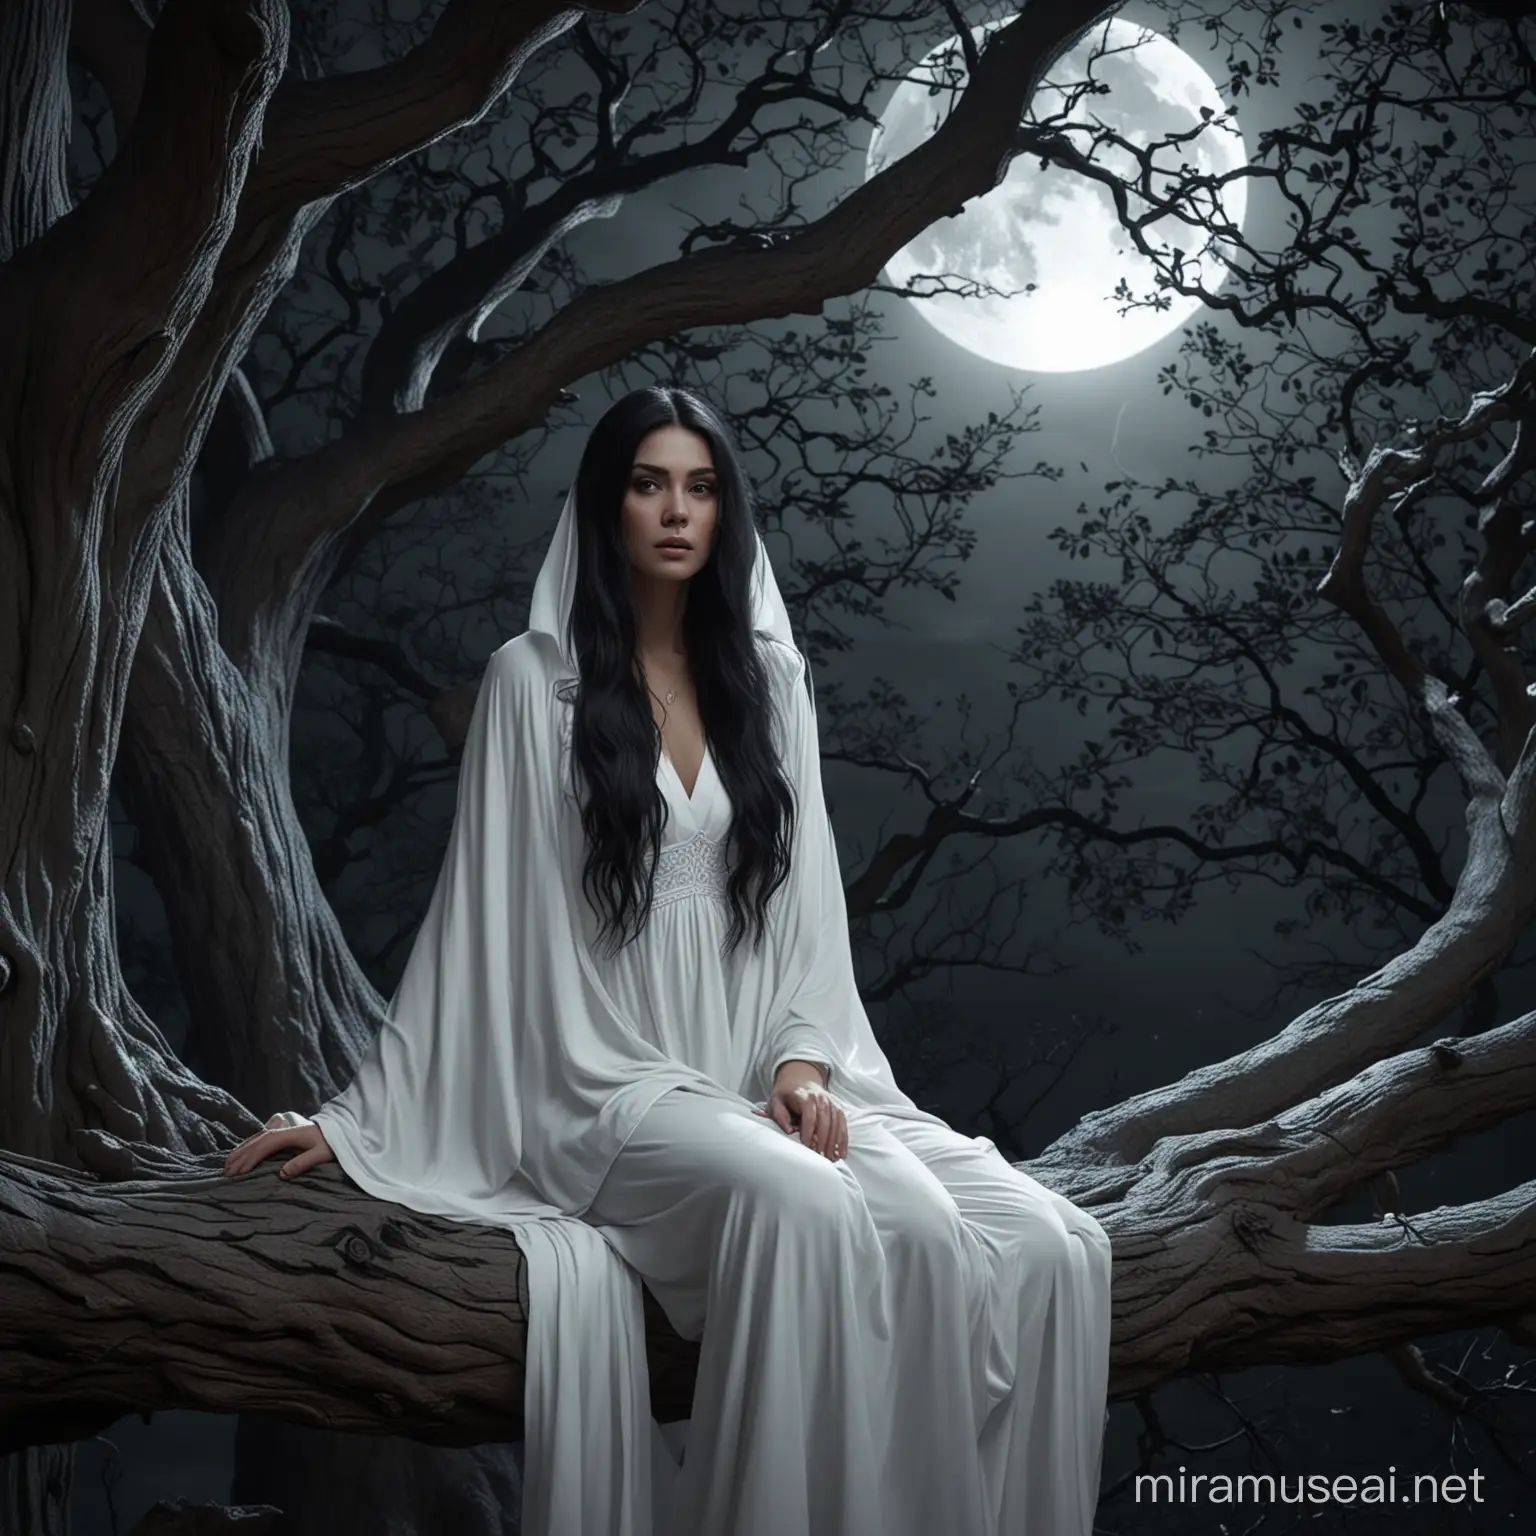 a black long hair Goddess of the dark, wearing a long flowing white kaftan, sitting at the high big haunted tree branch, scary, dark night with full moon, looking at the camera, long distance view, photorealistic, highly detailed